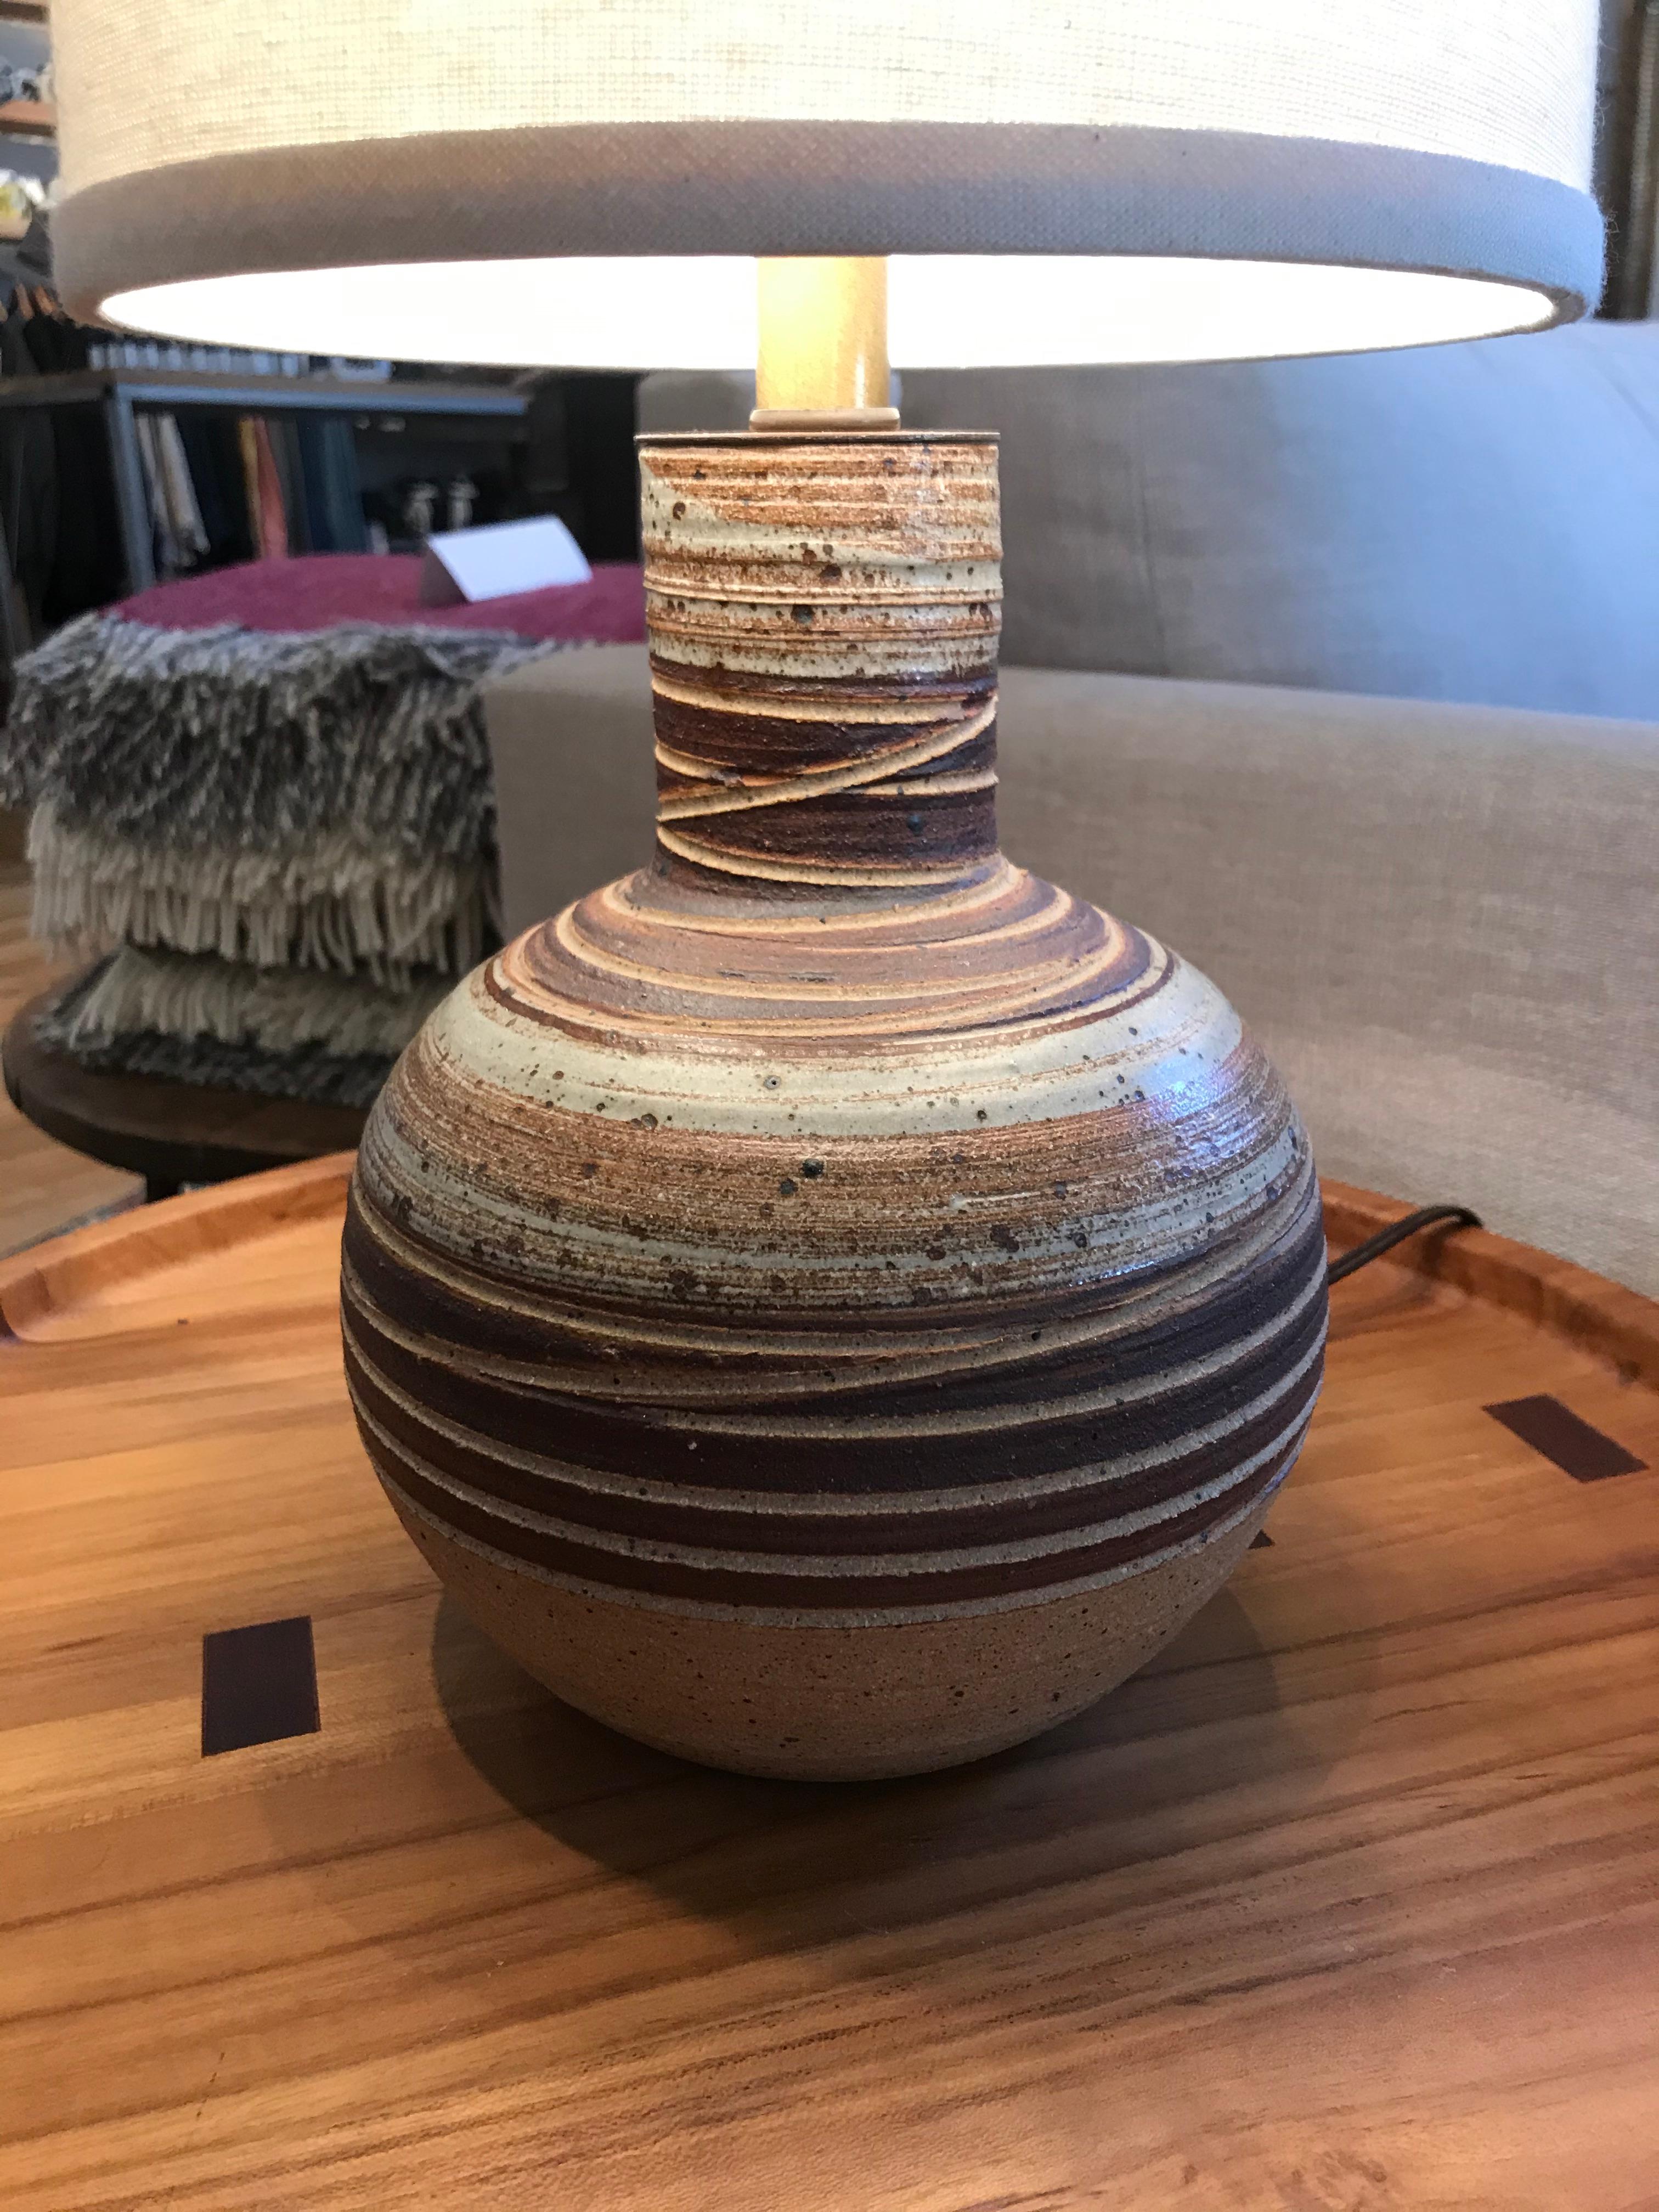 A beautiful table lamp with mesmerizing earth tones.
Makers mark stamped on the base of lamp.